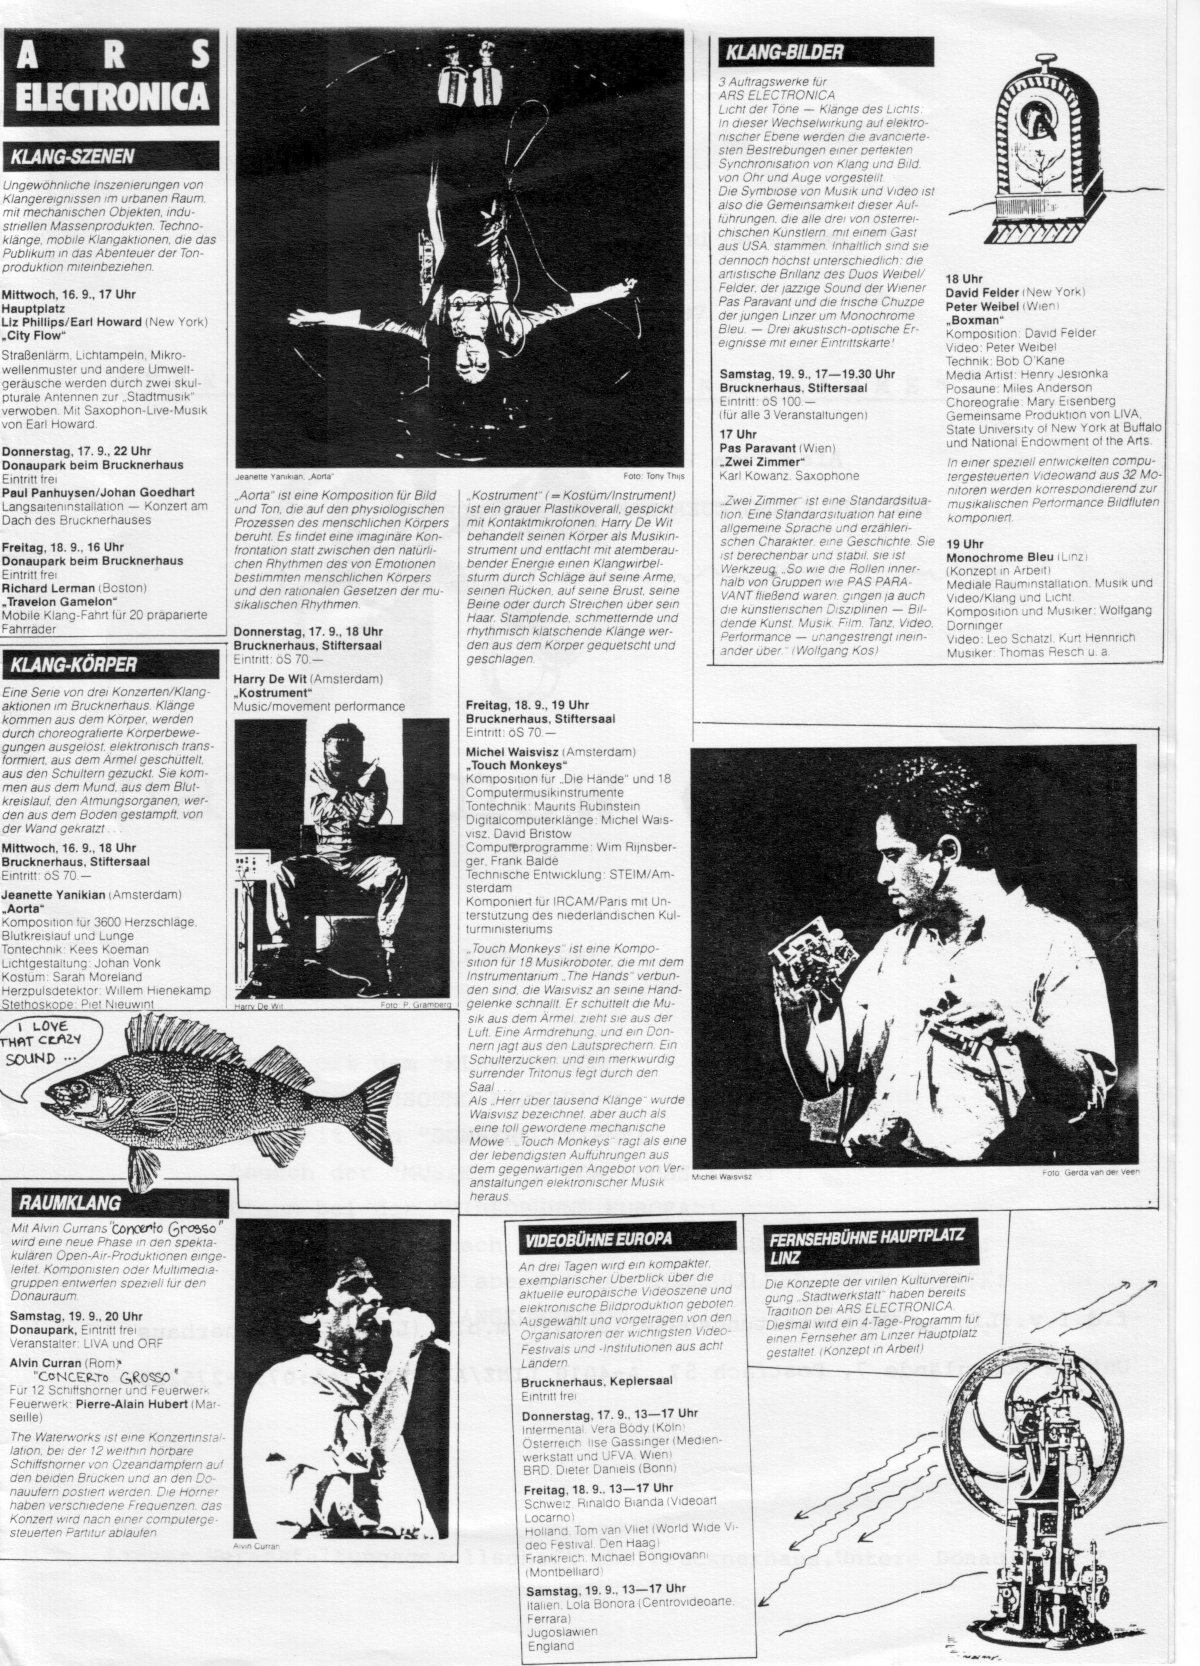 Flyer: Live at Ars Electronica 1987